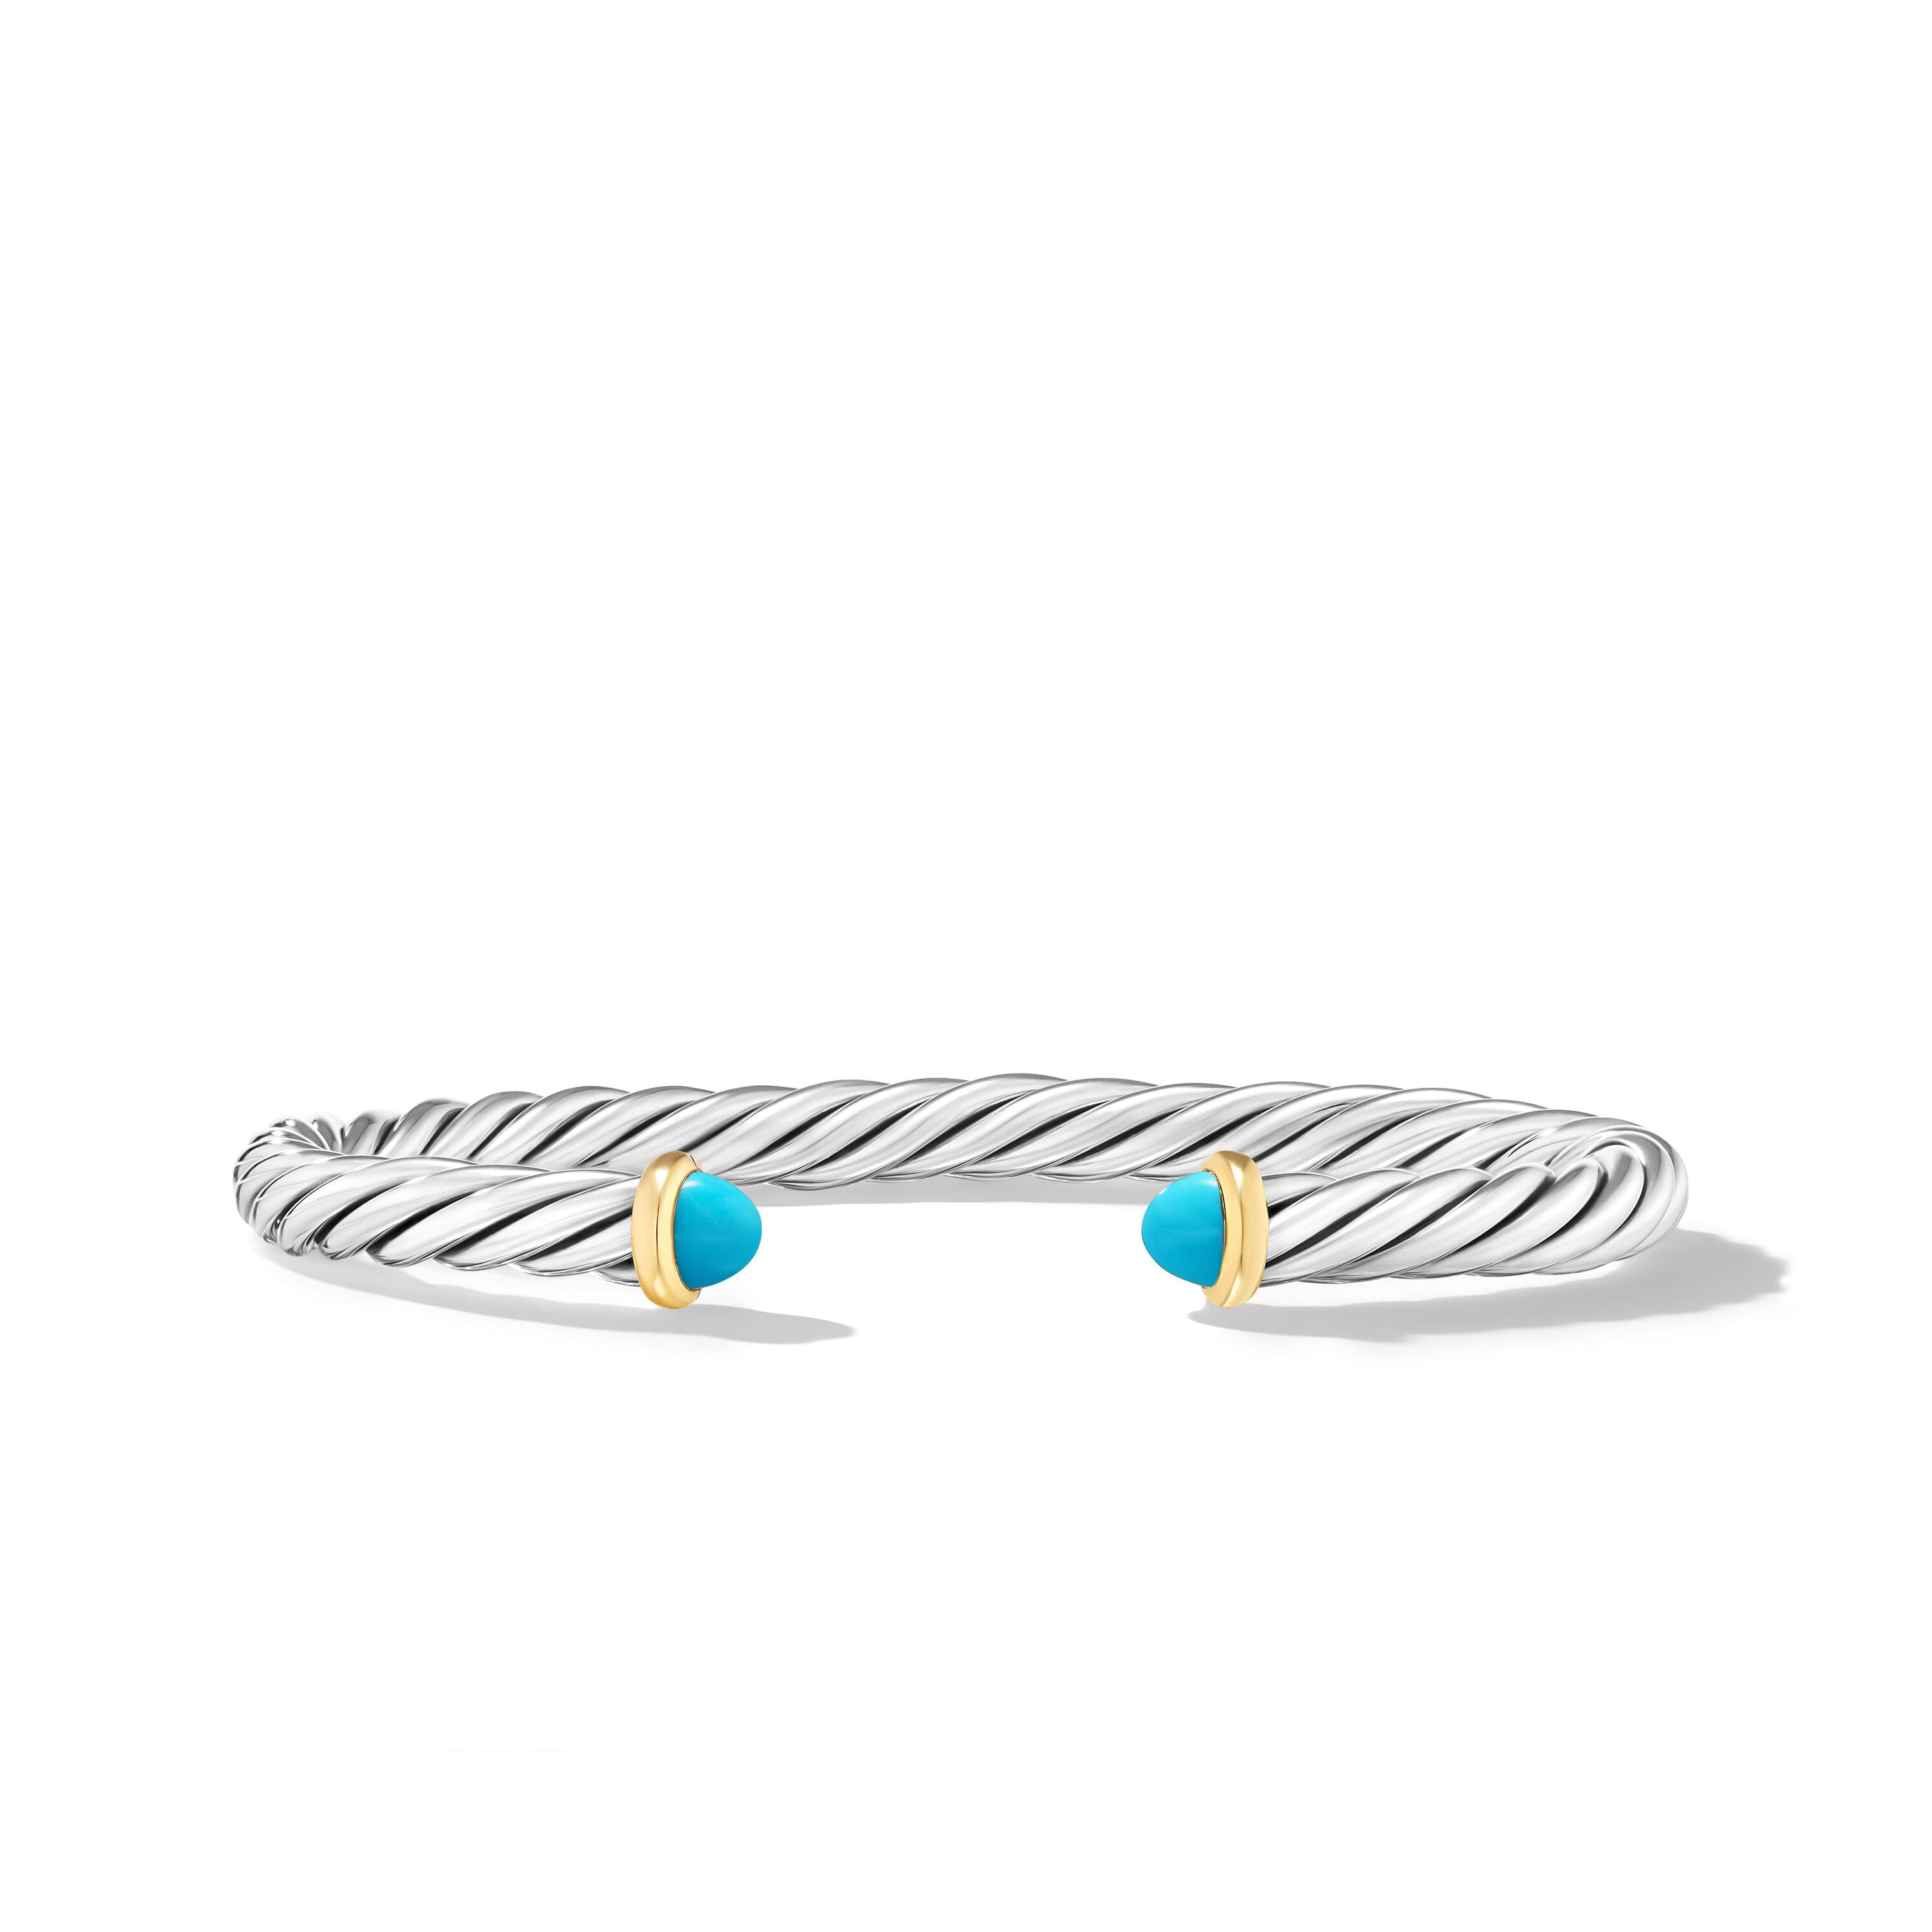 David Yurman 6mm Cable Cuff Bracelet in Sterling Silver with 14K Yellow Gold and Turquoise, Small